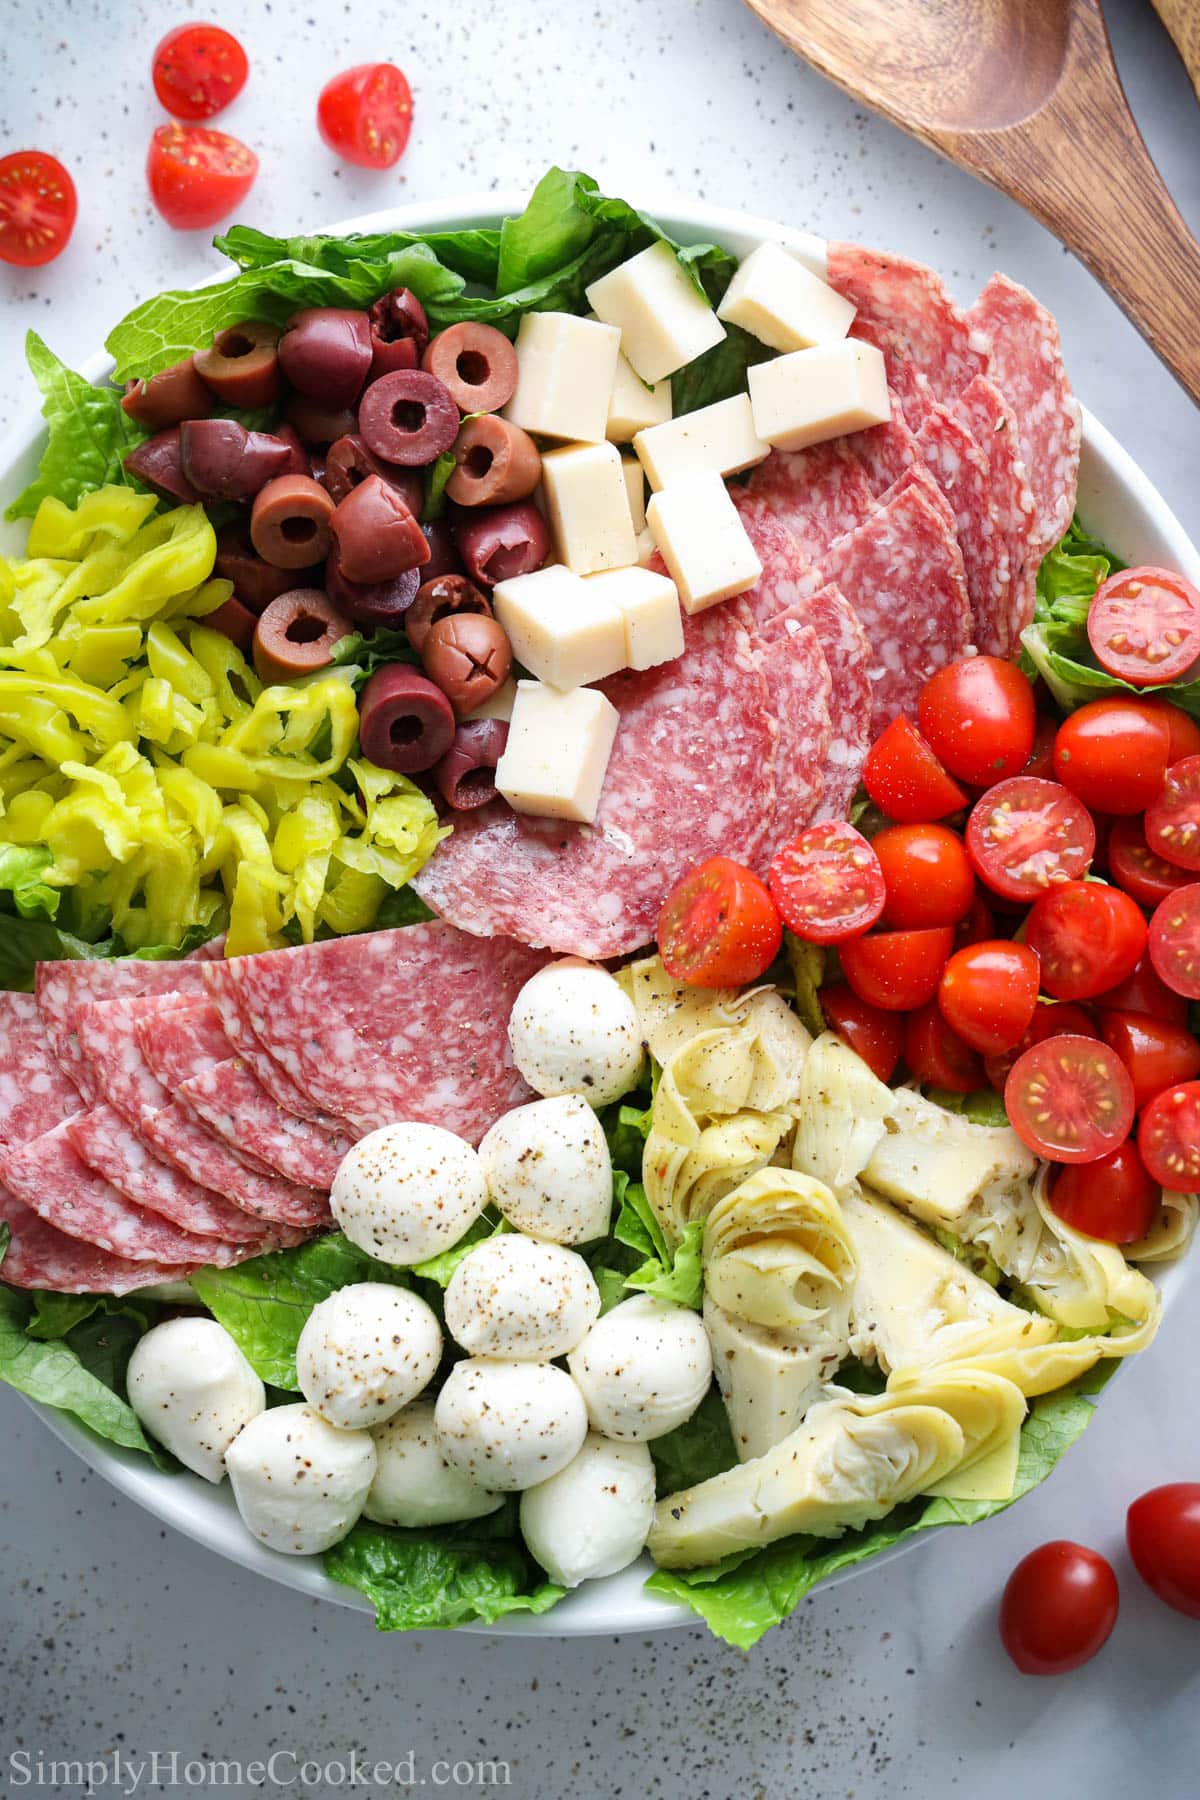 image of Antipasto Salad in a white plate with a wooden spoon next to it